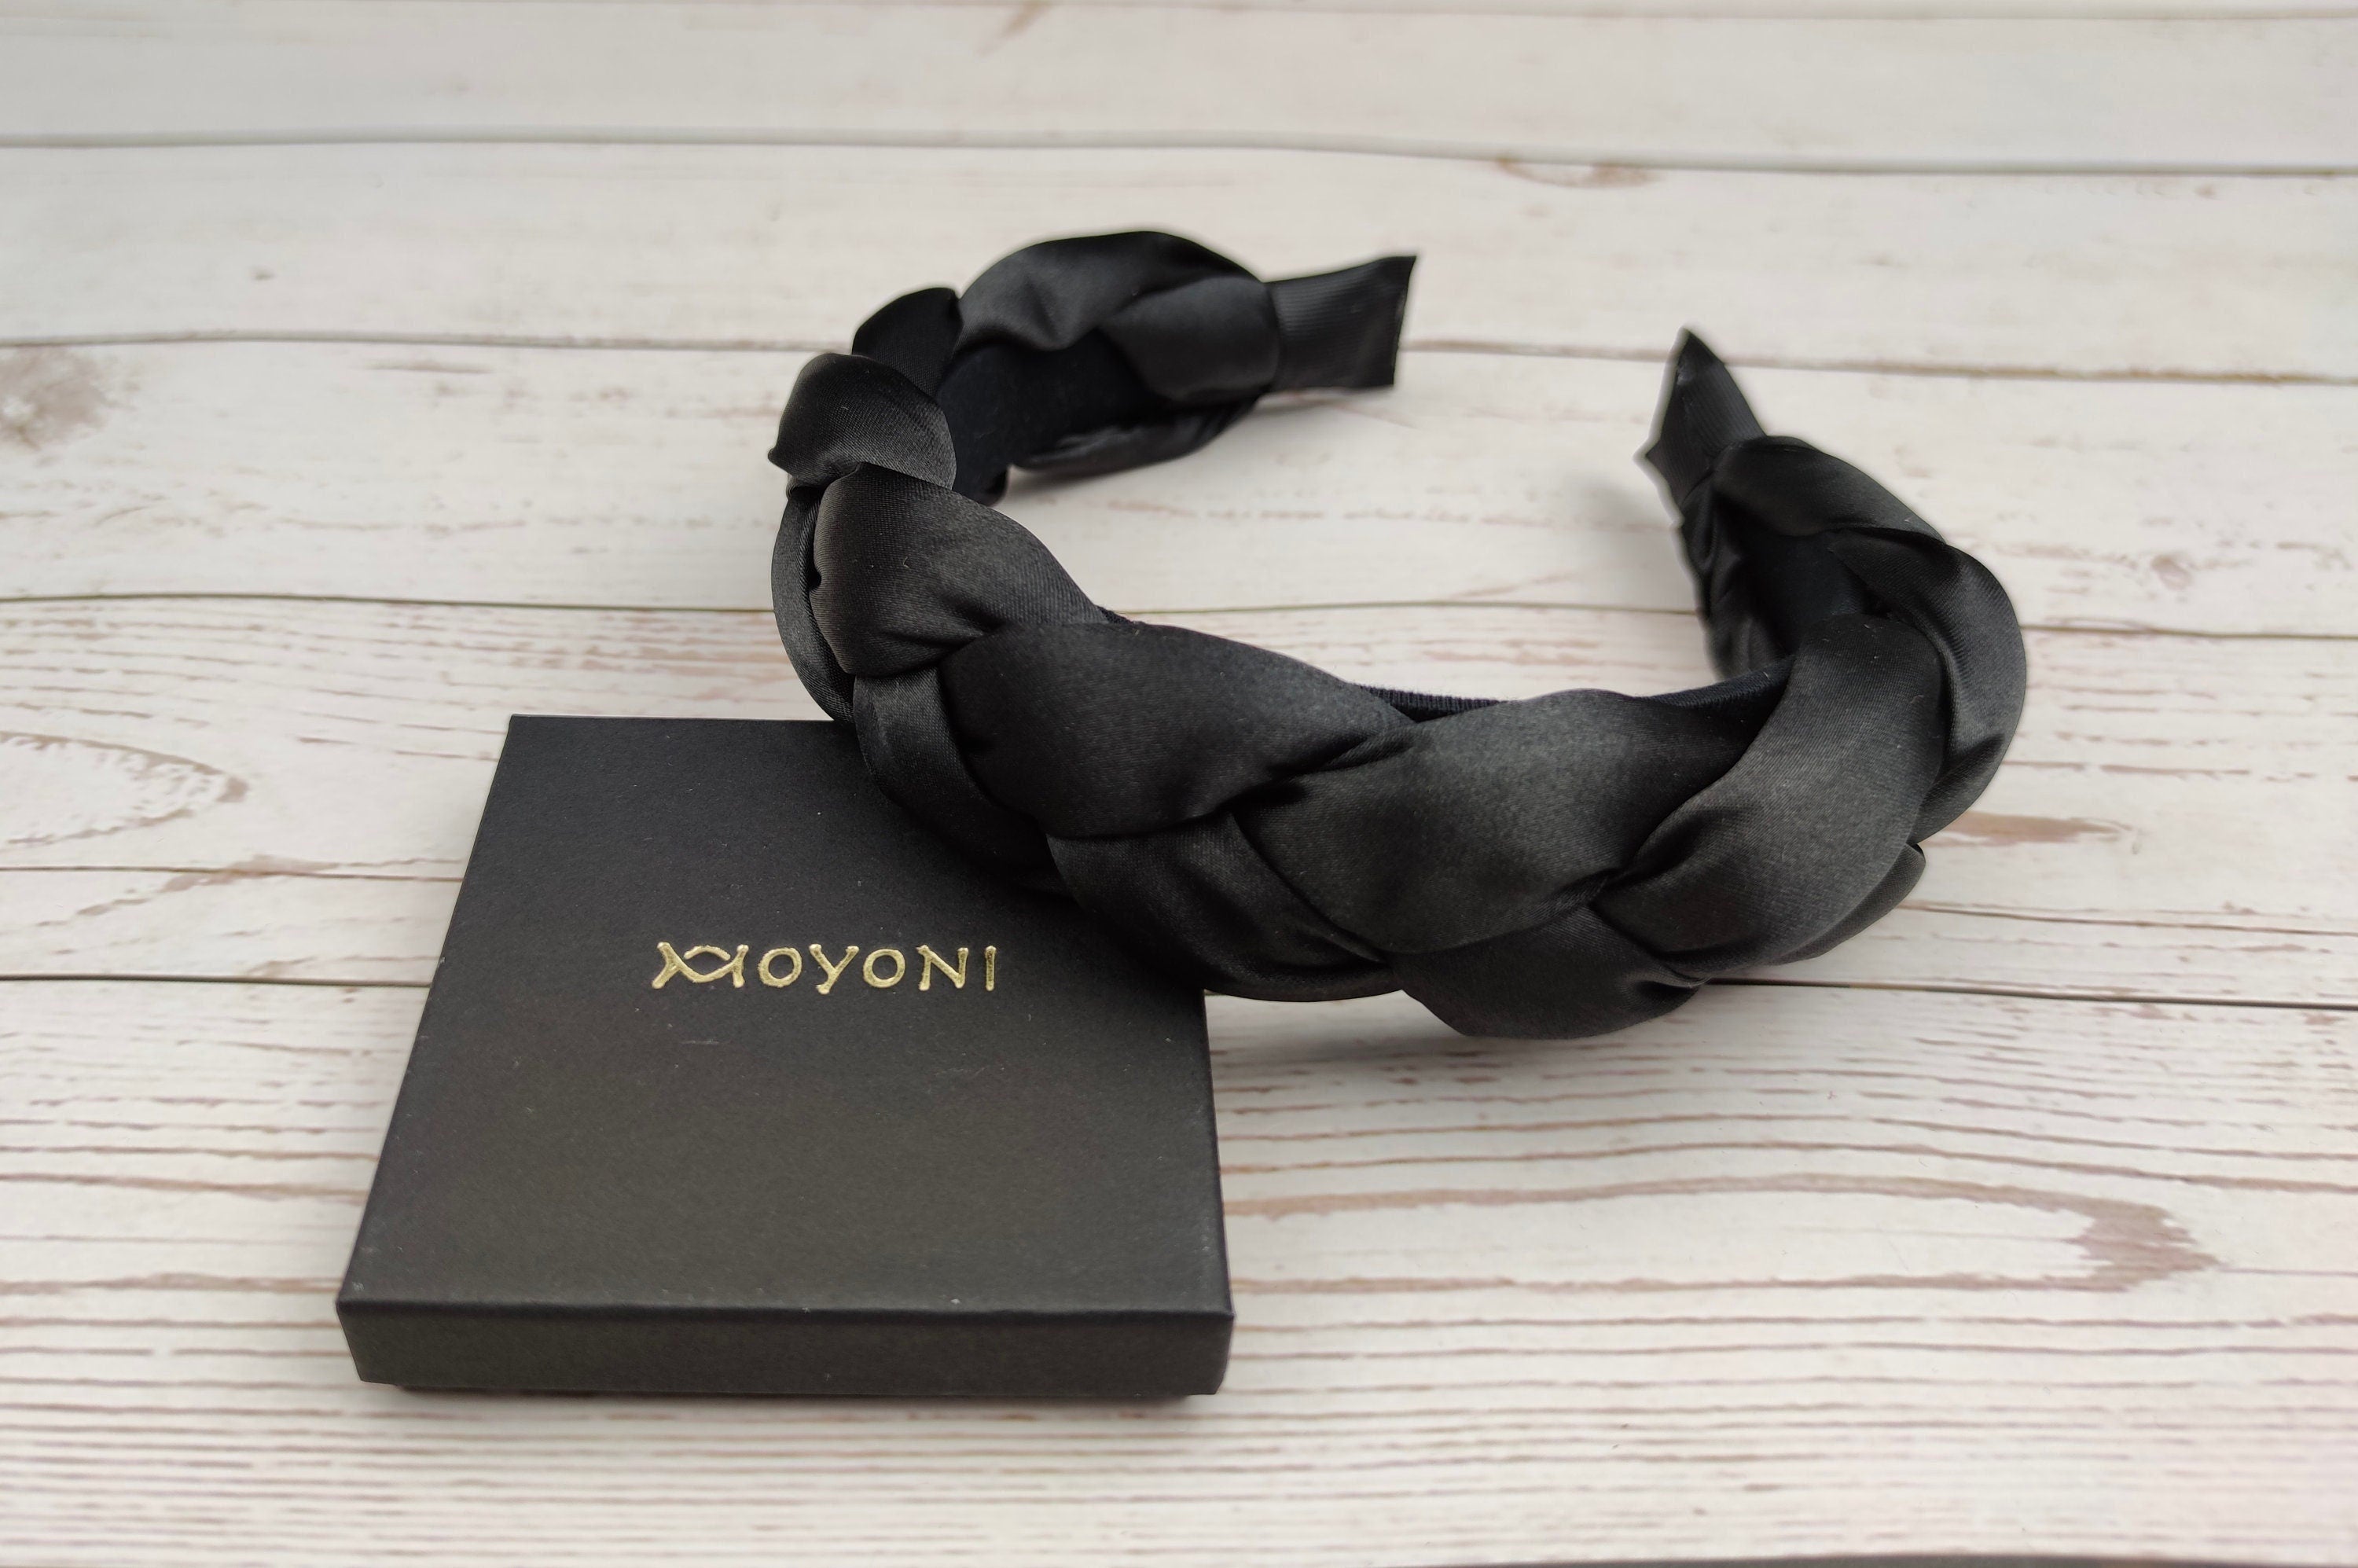 Make a statement with this black padded satin headband, perfect for adding a touch of luxury to any outfit.